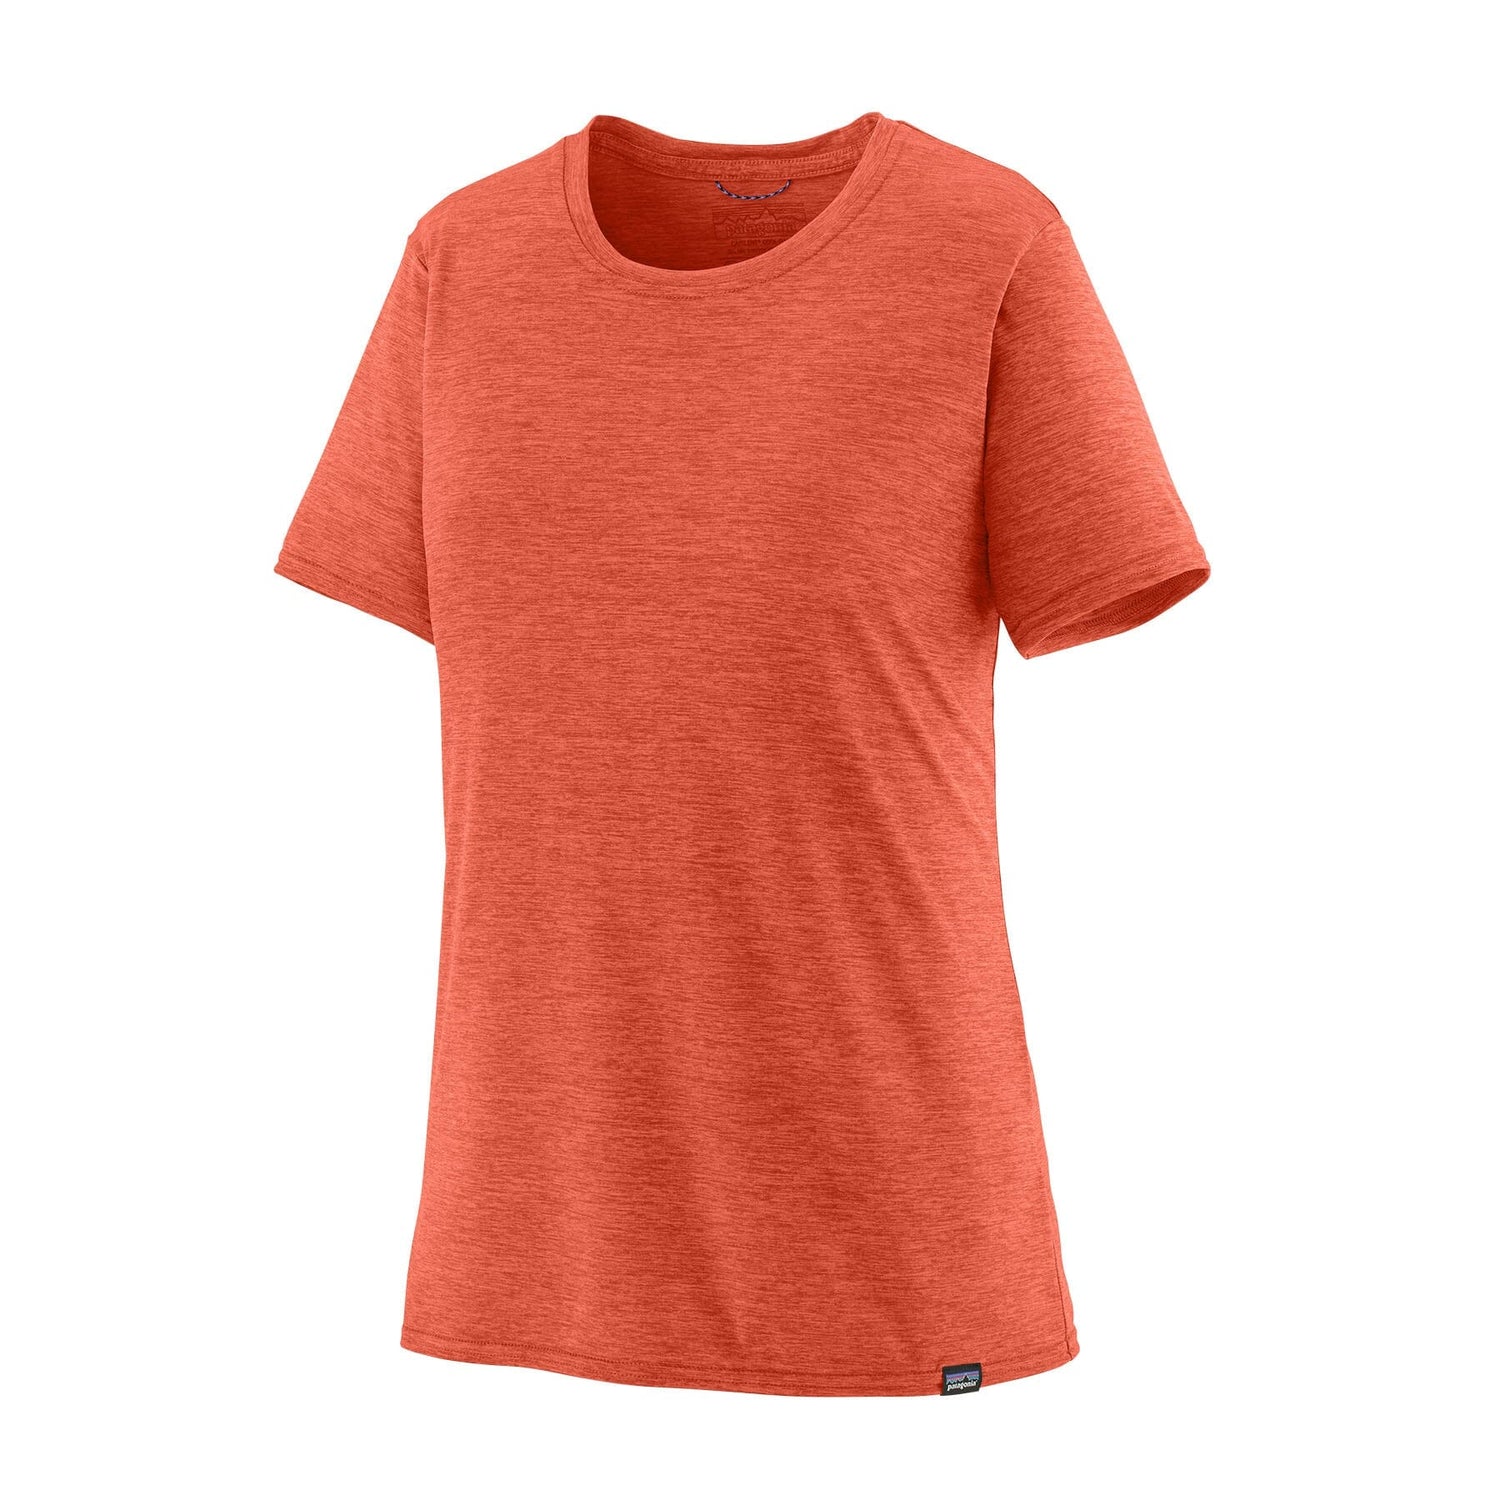 Patagonia W's Capilene Cool Daily Shirt - Recycled Polyester Pimento Red - Coho Coral X-Dye Shirt